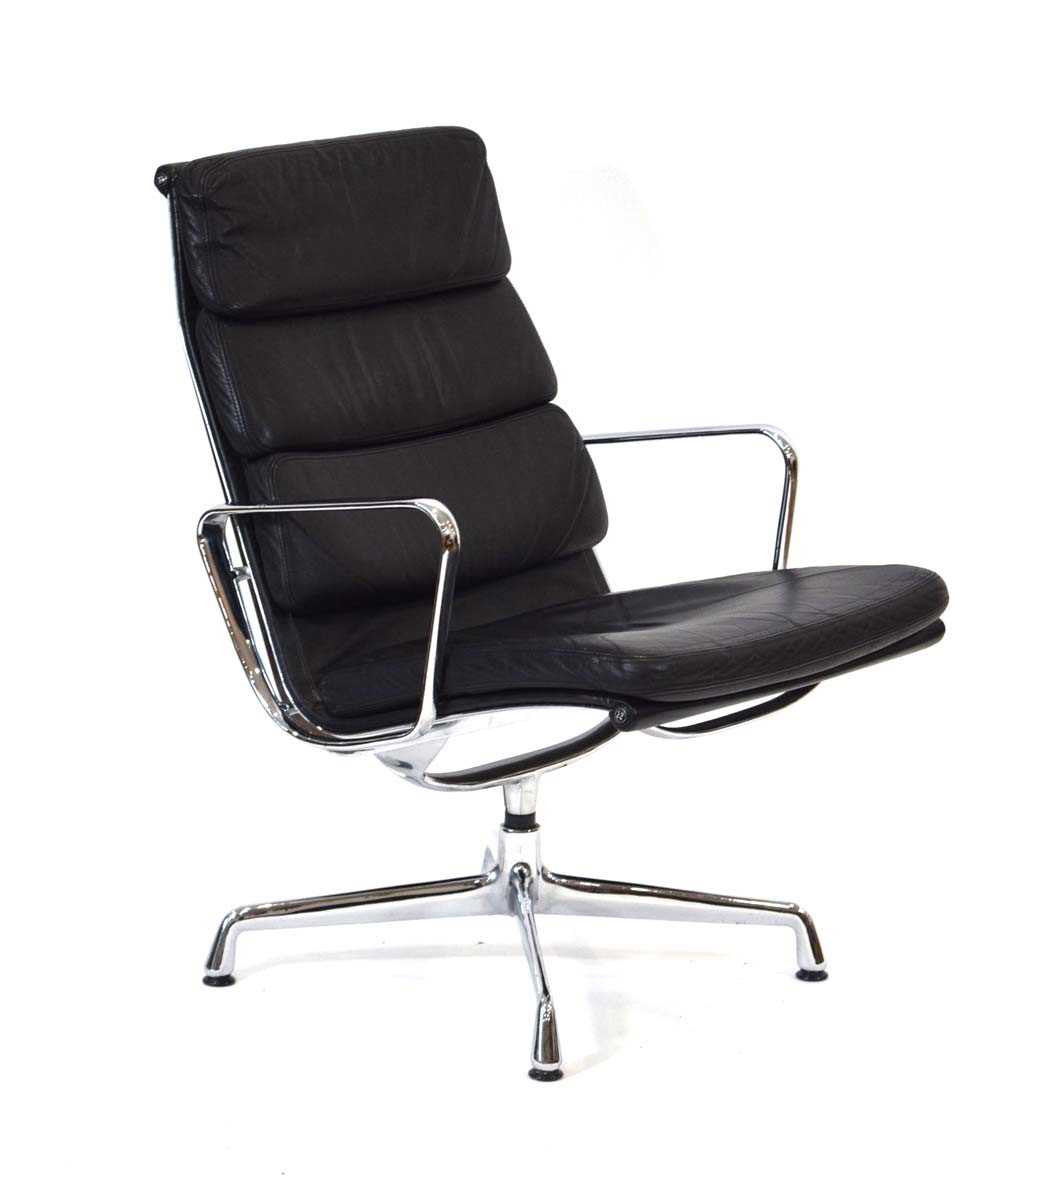 Charles and Ray Eames for Vitra, a 1980's Soft pad (Softpad) elbow or desk chair upholstered in